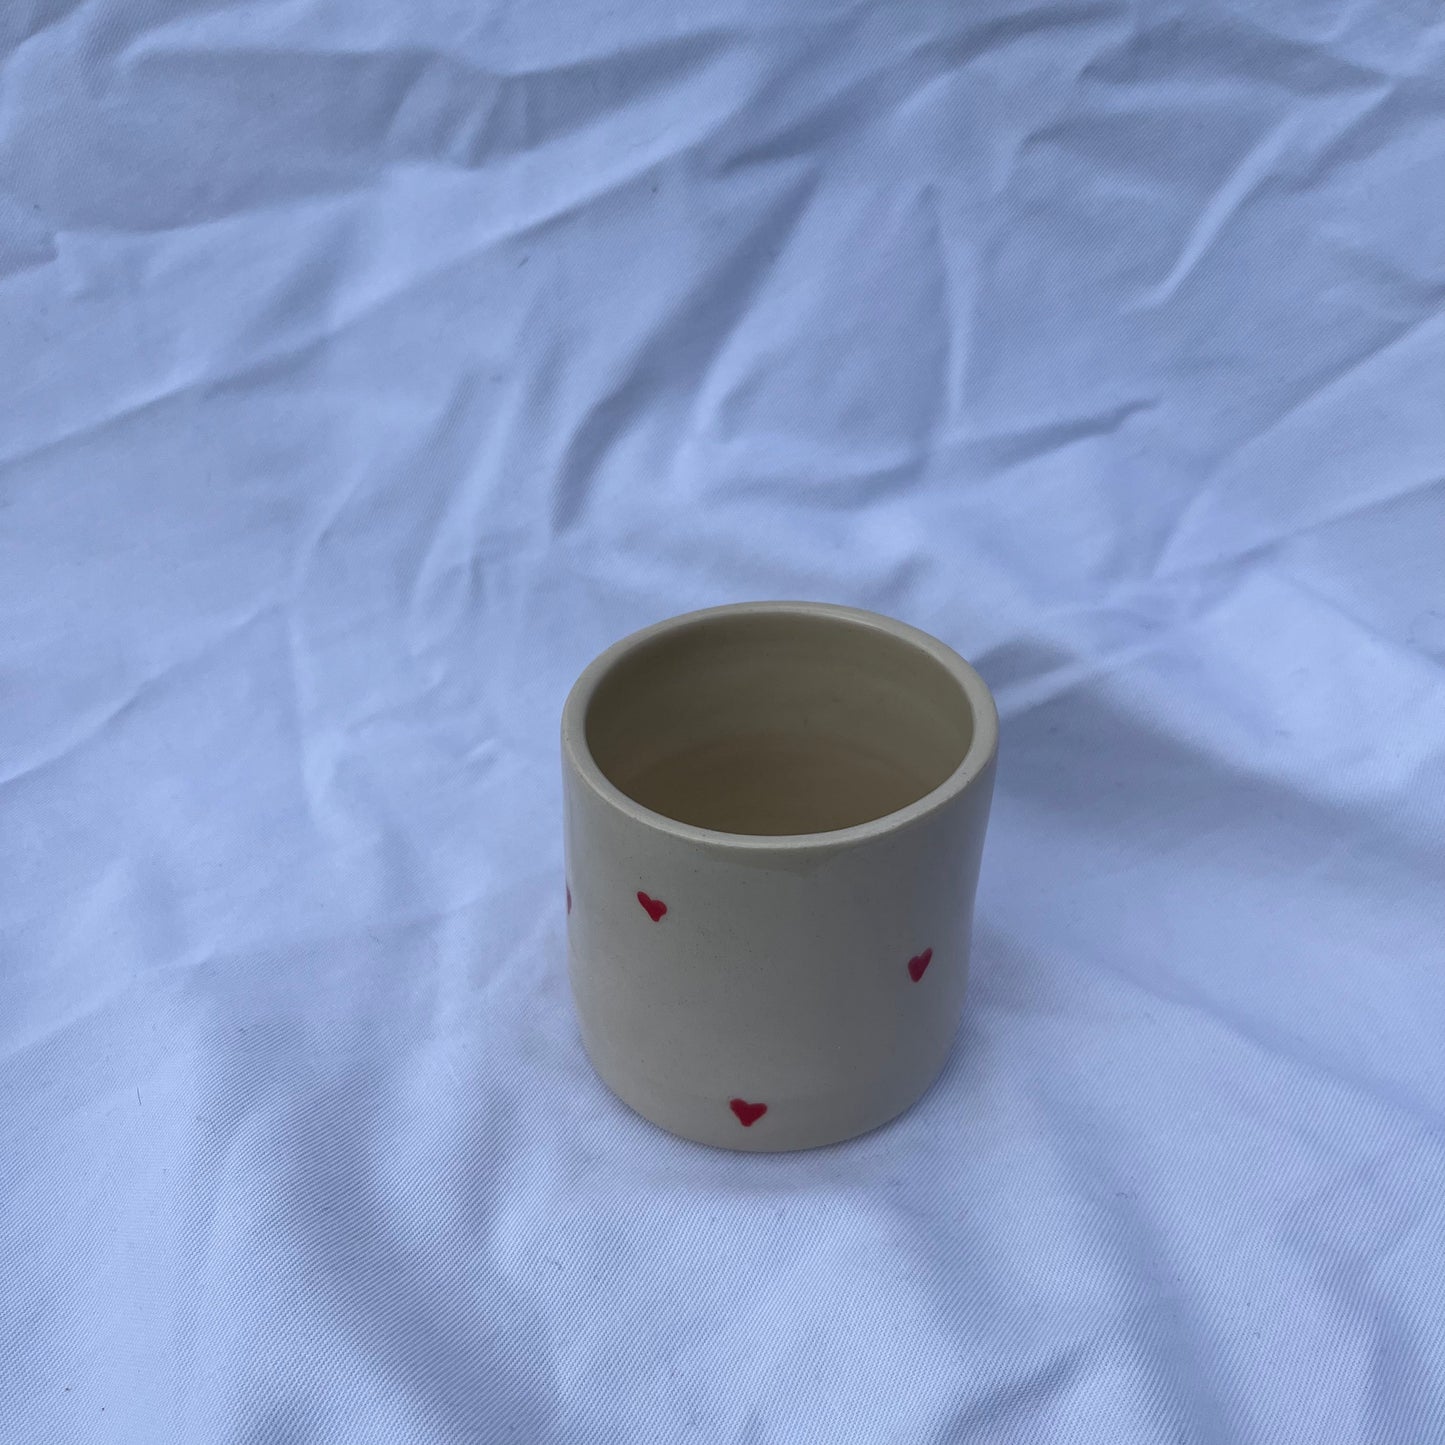 Imperfect heart cup